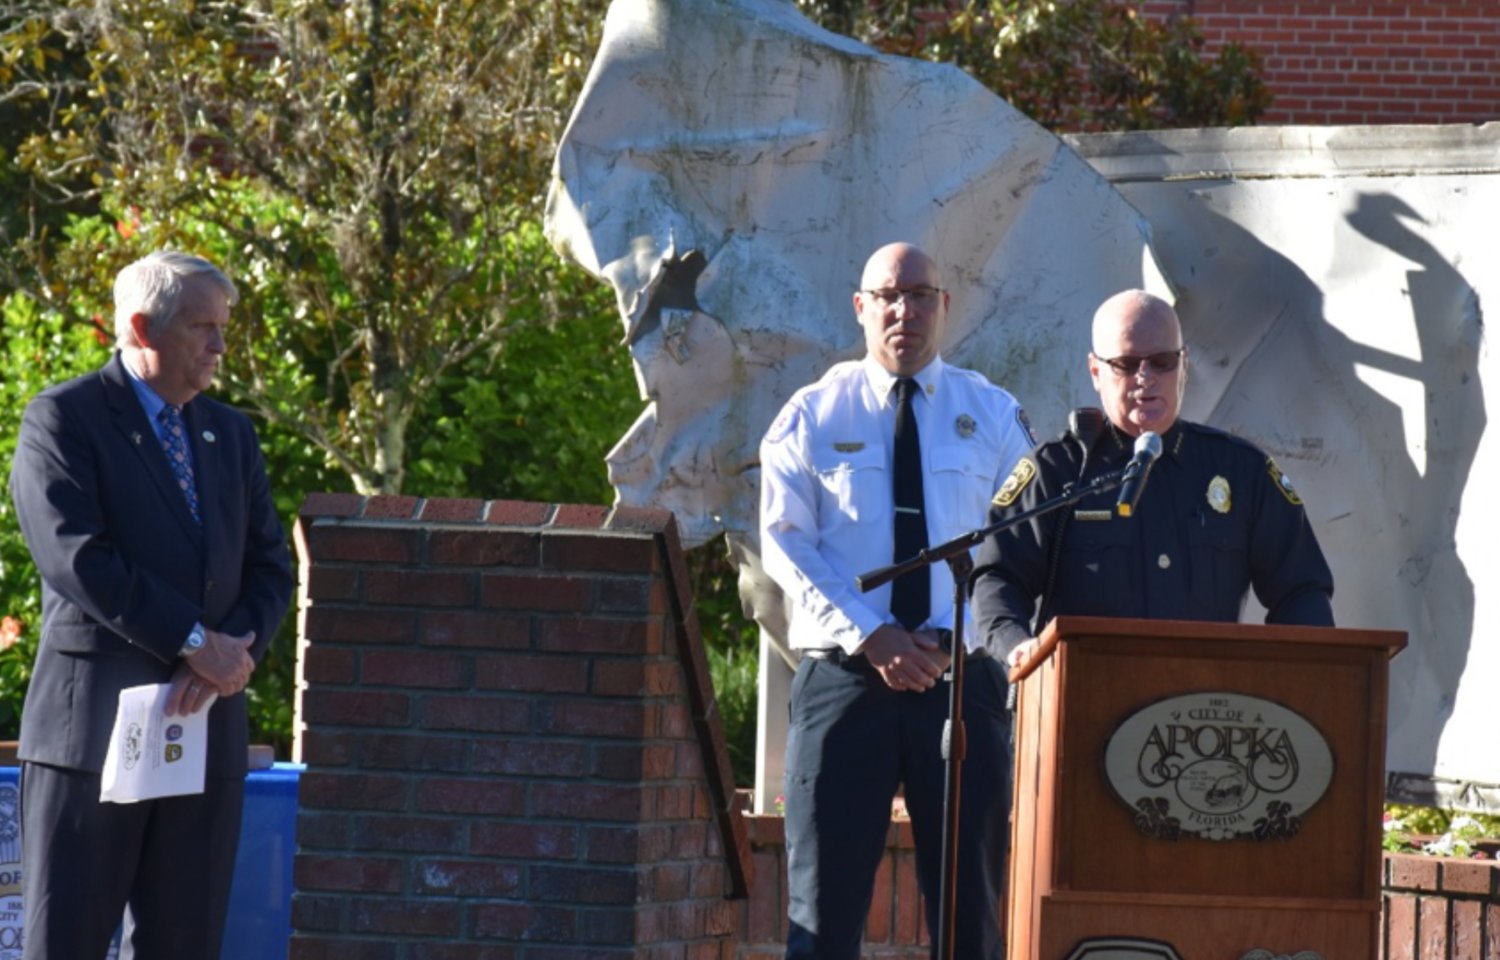 Apopka Police Chief Michael McKinley speaks during Apopka 9/11 ceremonies, with Mayor Bryan Nelson and Fire Chief Sean Wylam looking on.